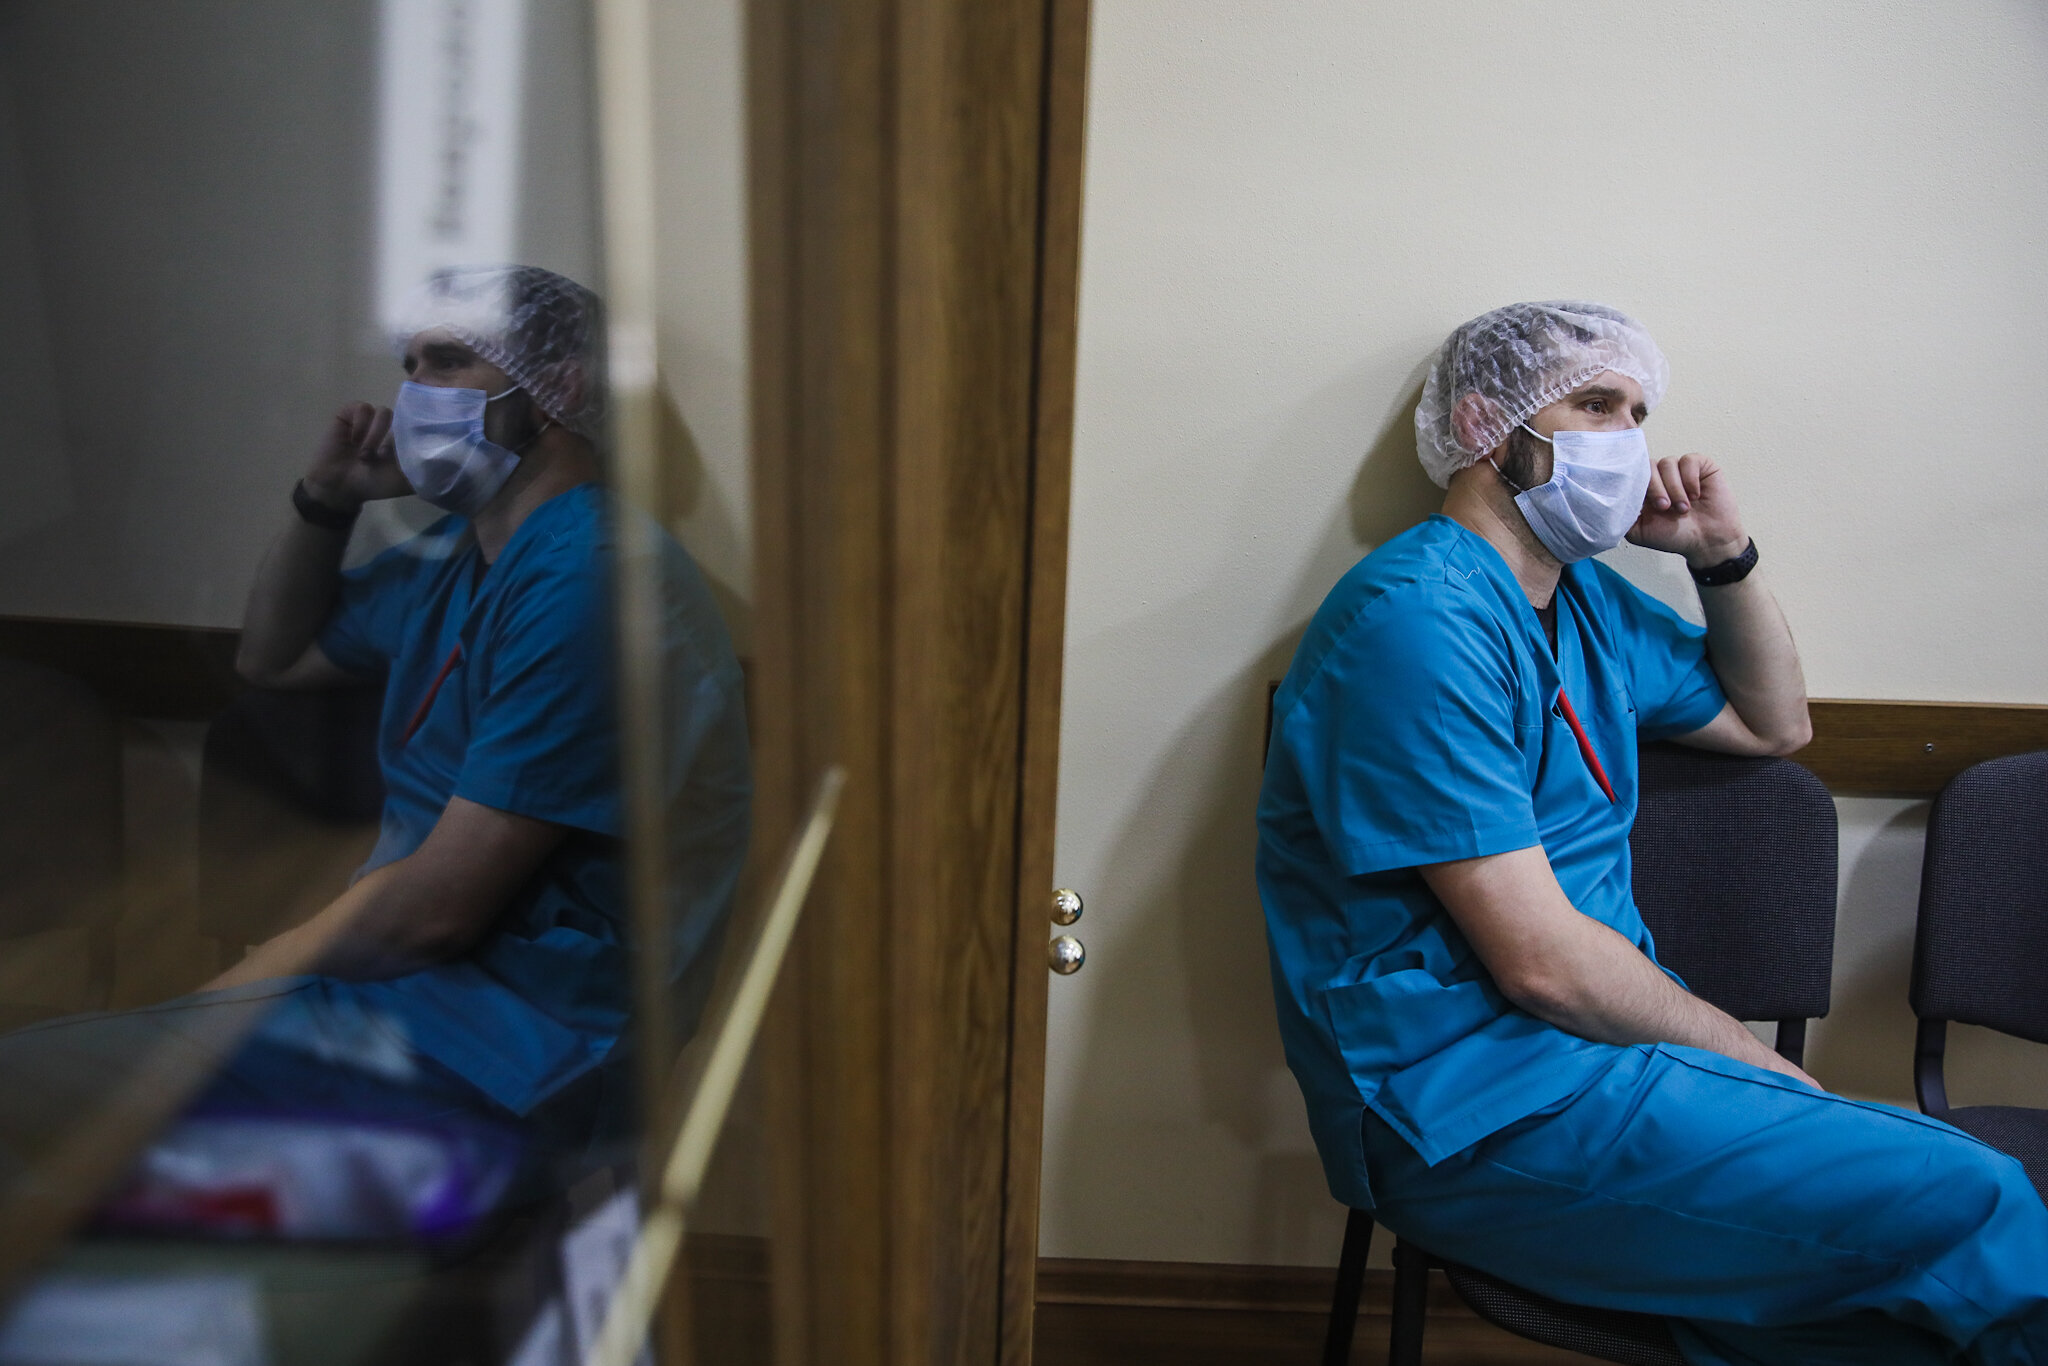 Ihor Klapko, head of the inpatient department at Kolomyia District Hospital in Ivano-Frankivsk Oblast in his office on March 16, 2021.